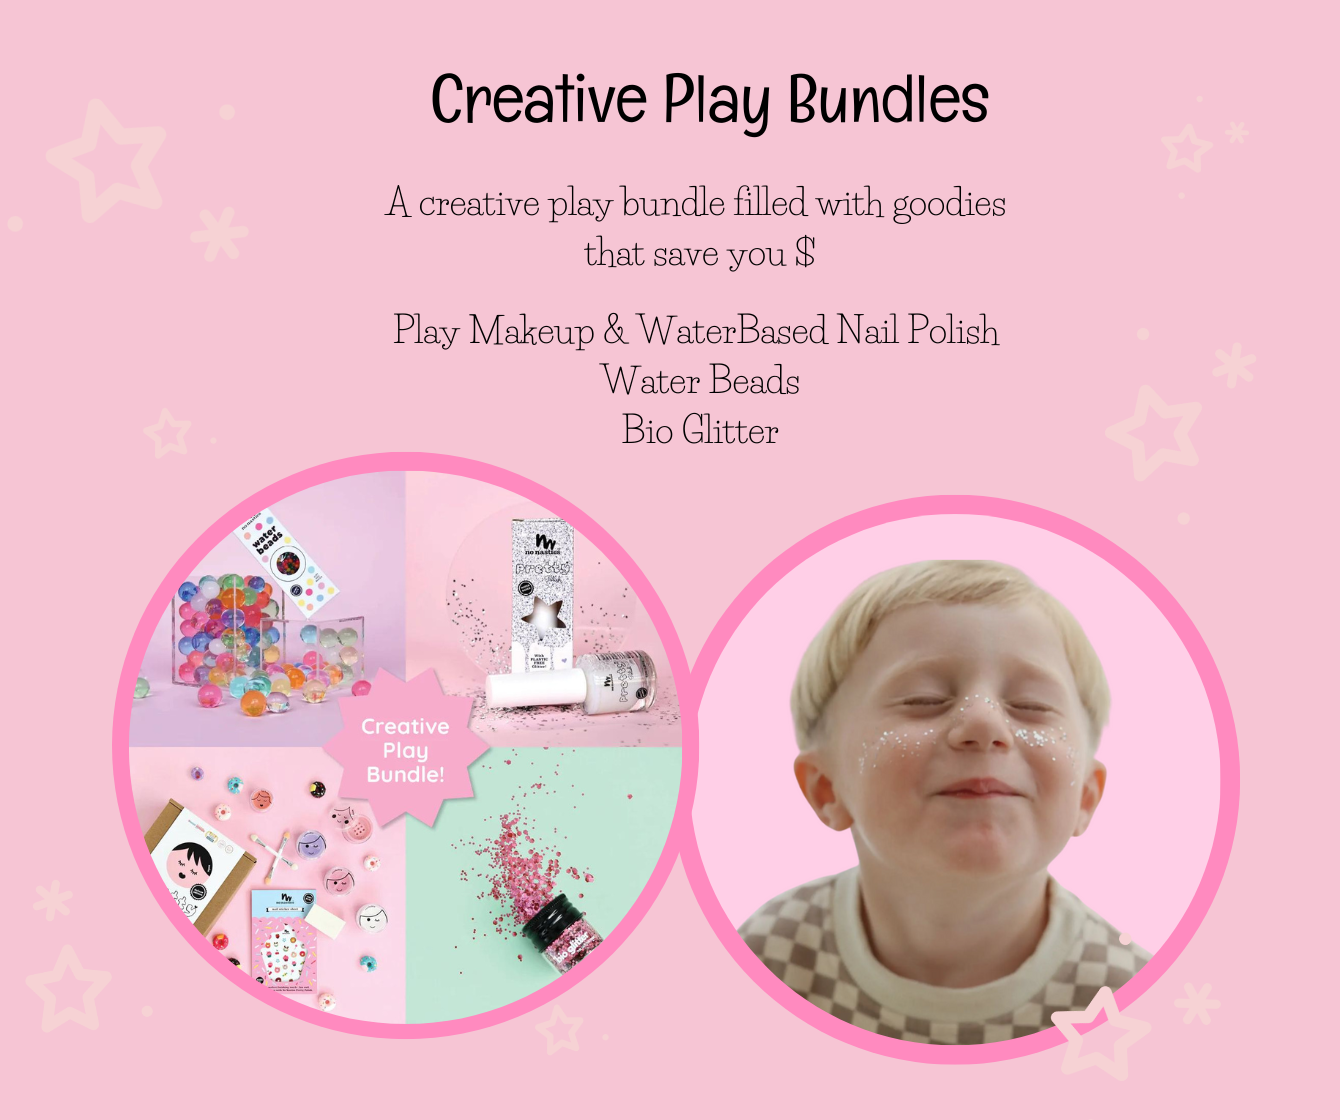 Bundles of creative play kids products